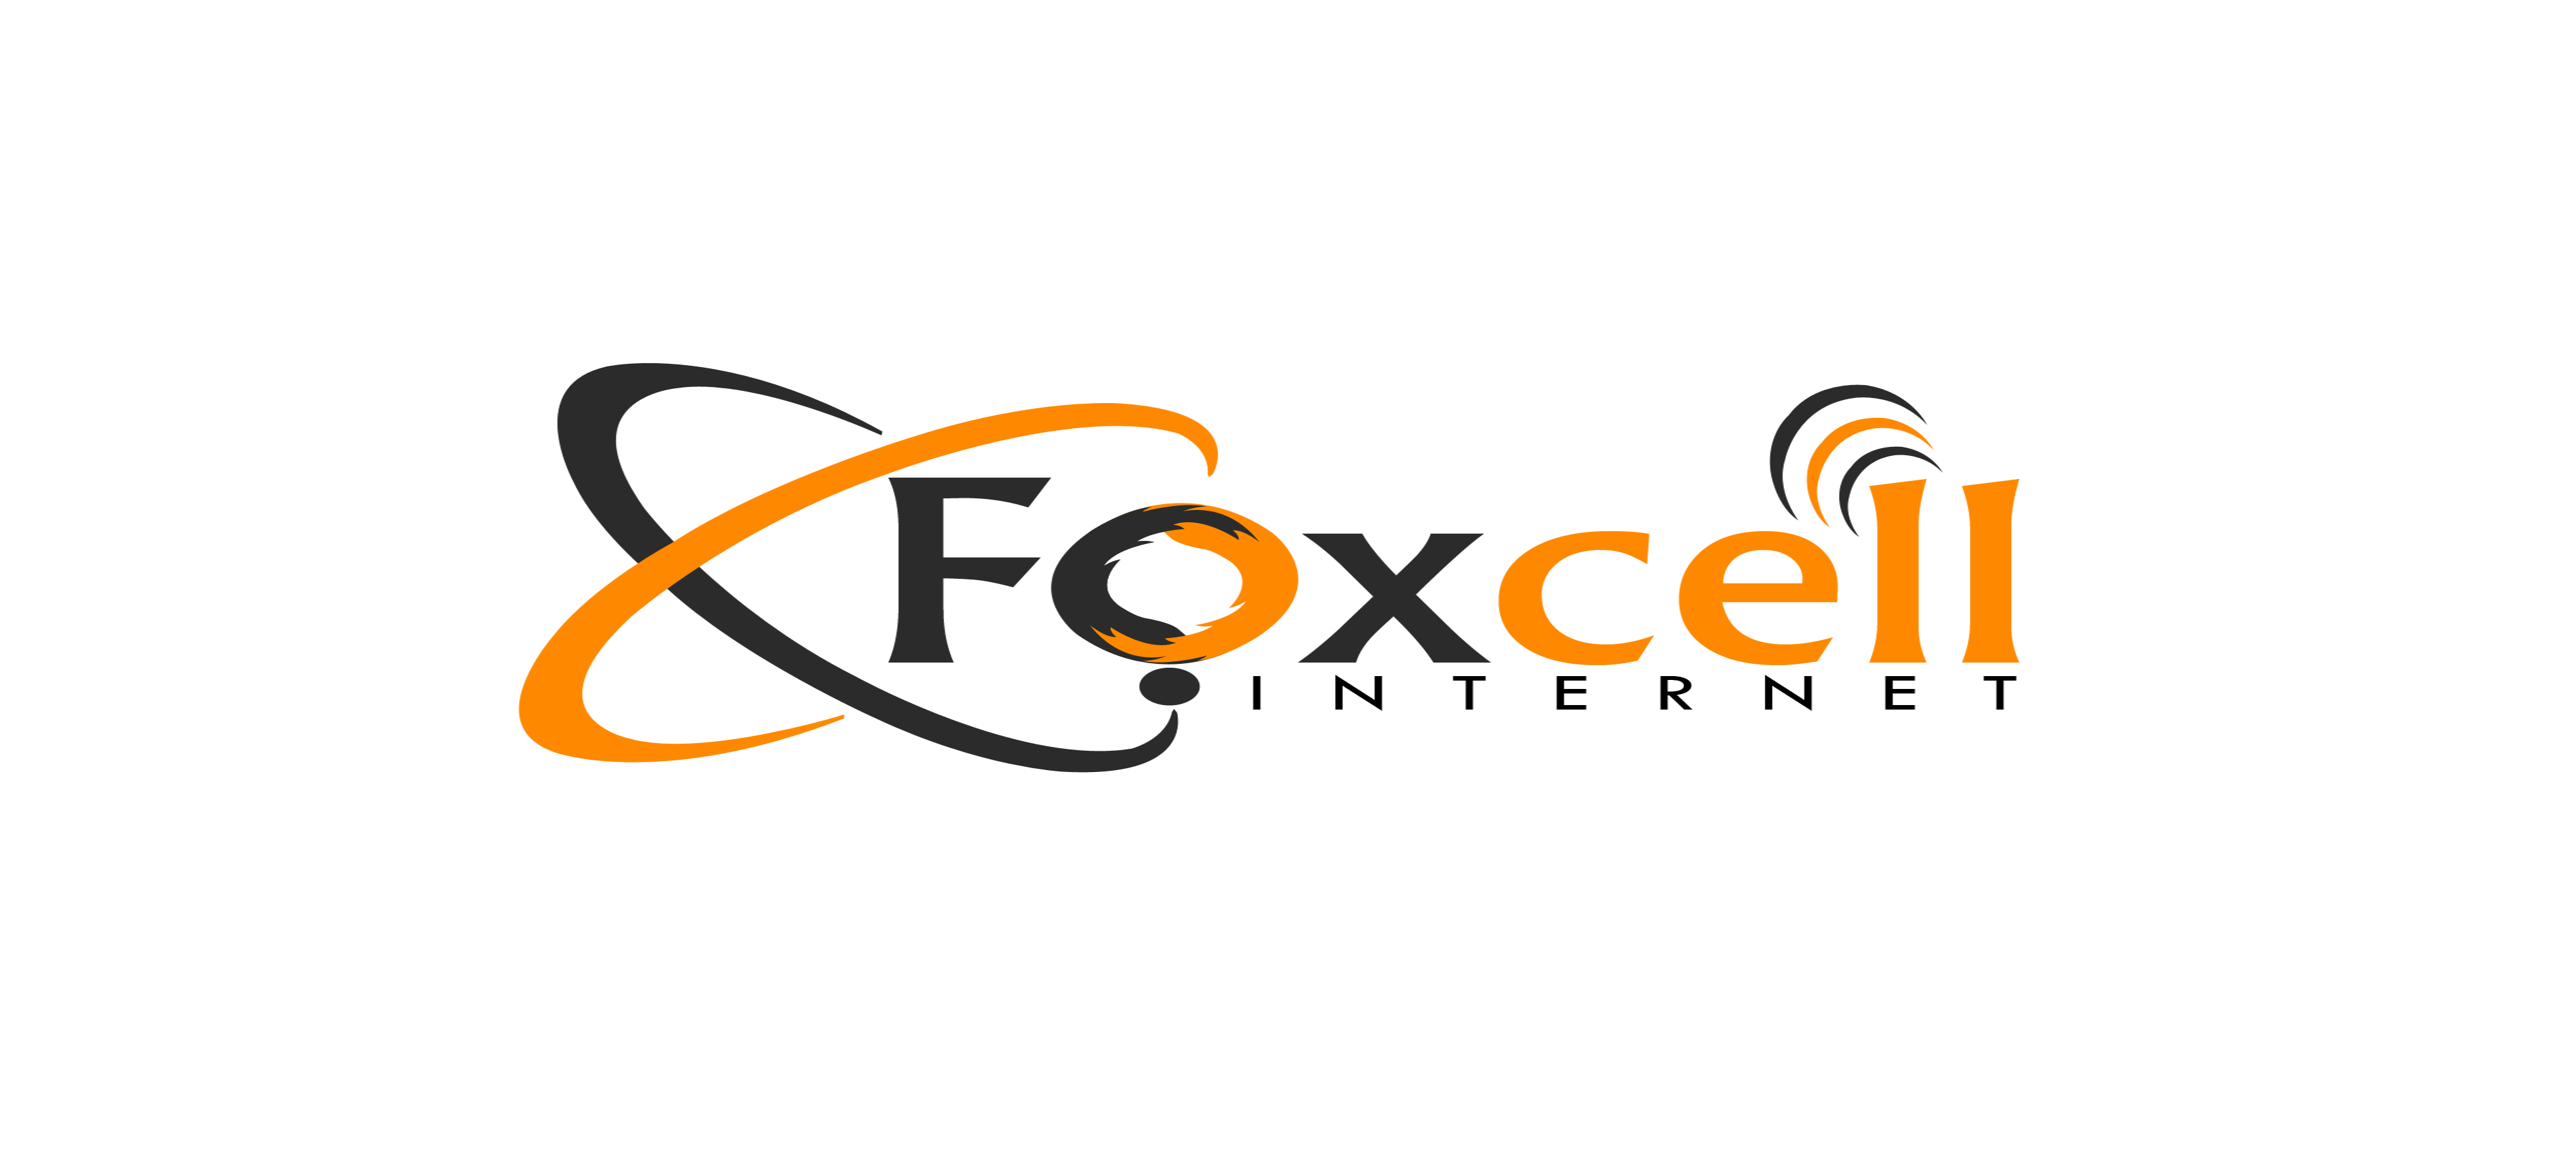 Foxcell Support Helpdesk